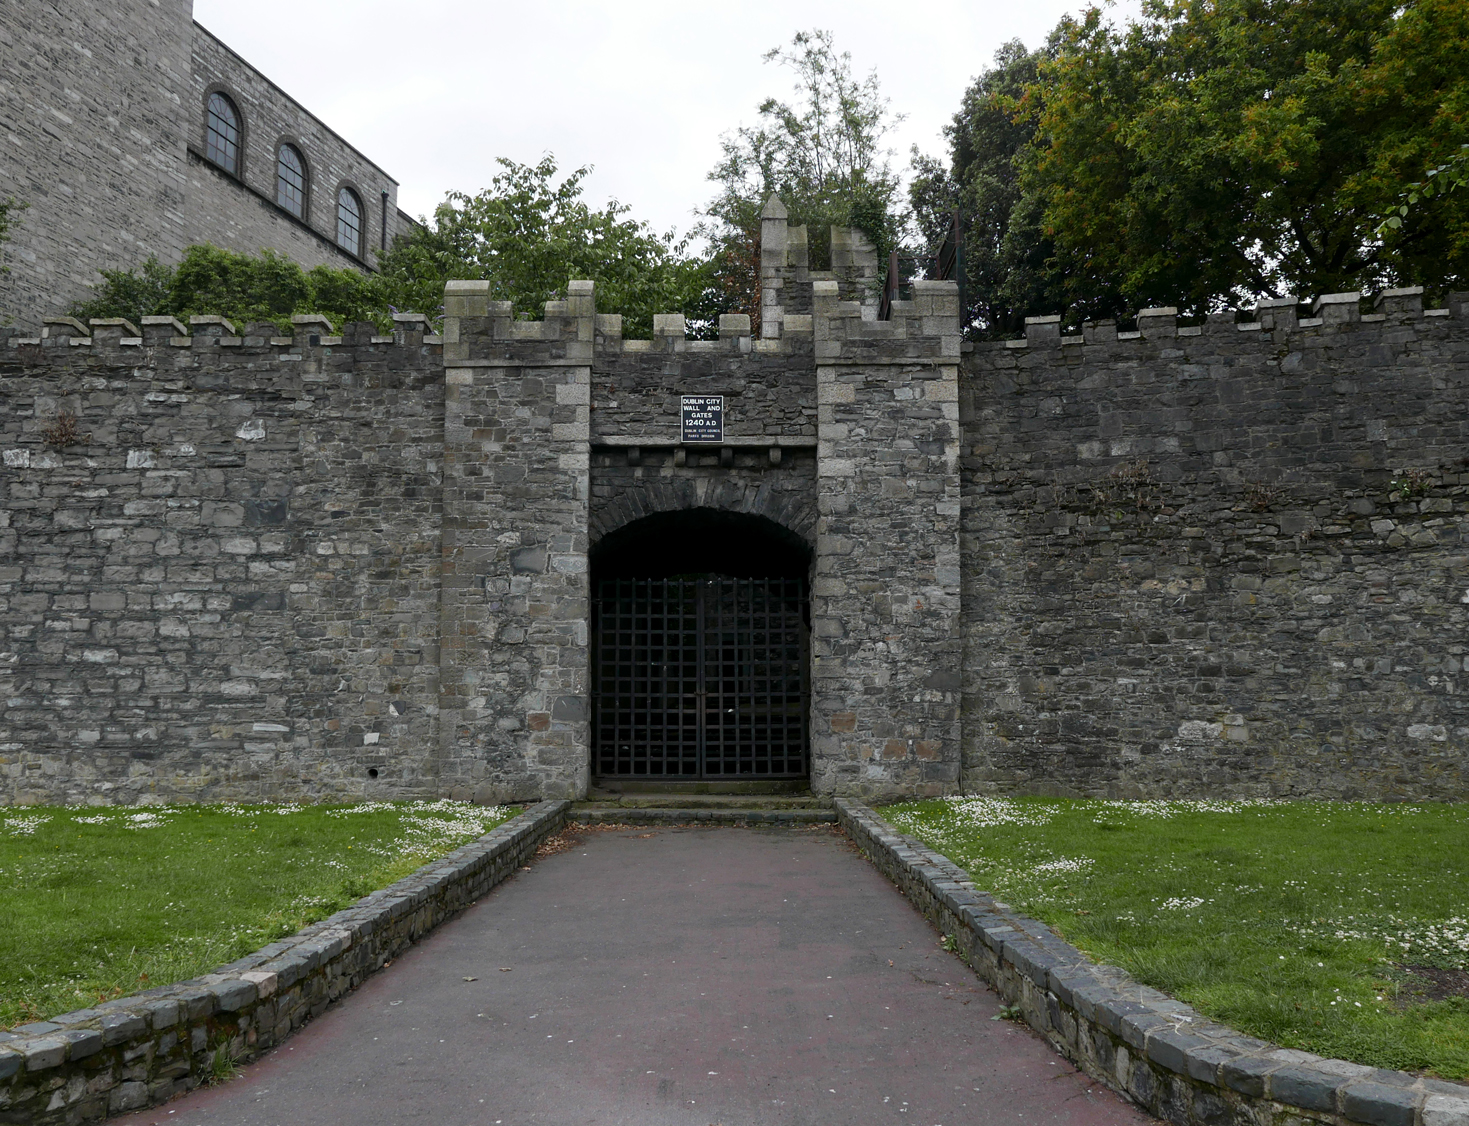 Dublin's old city wall and gate